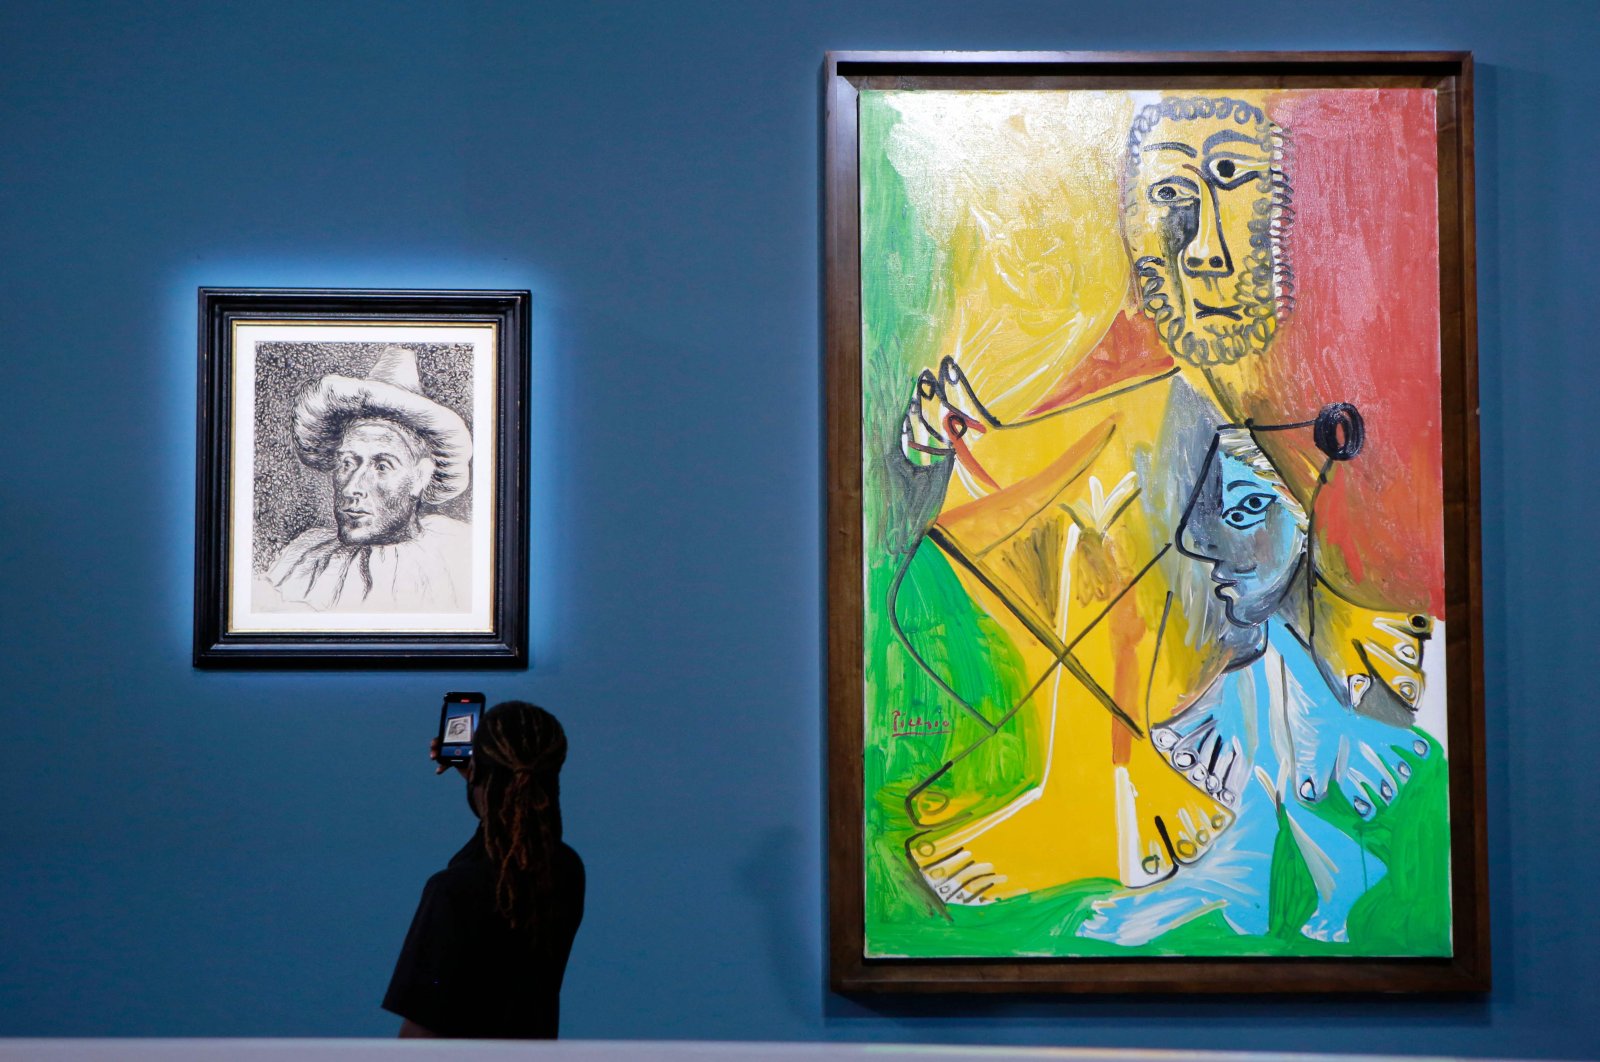 A guest takes a personal photograph of Spanish artist Pablo Picasso's "Pierrot" (L), near "Homme et enfant," before the start of a Sotheby's auction of 11 works by Pablo Picasso, in Las Vegas, U.S., Oct. 23, 2021. (AFP Photo)